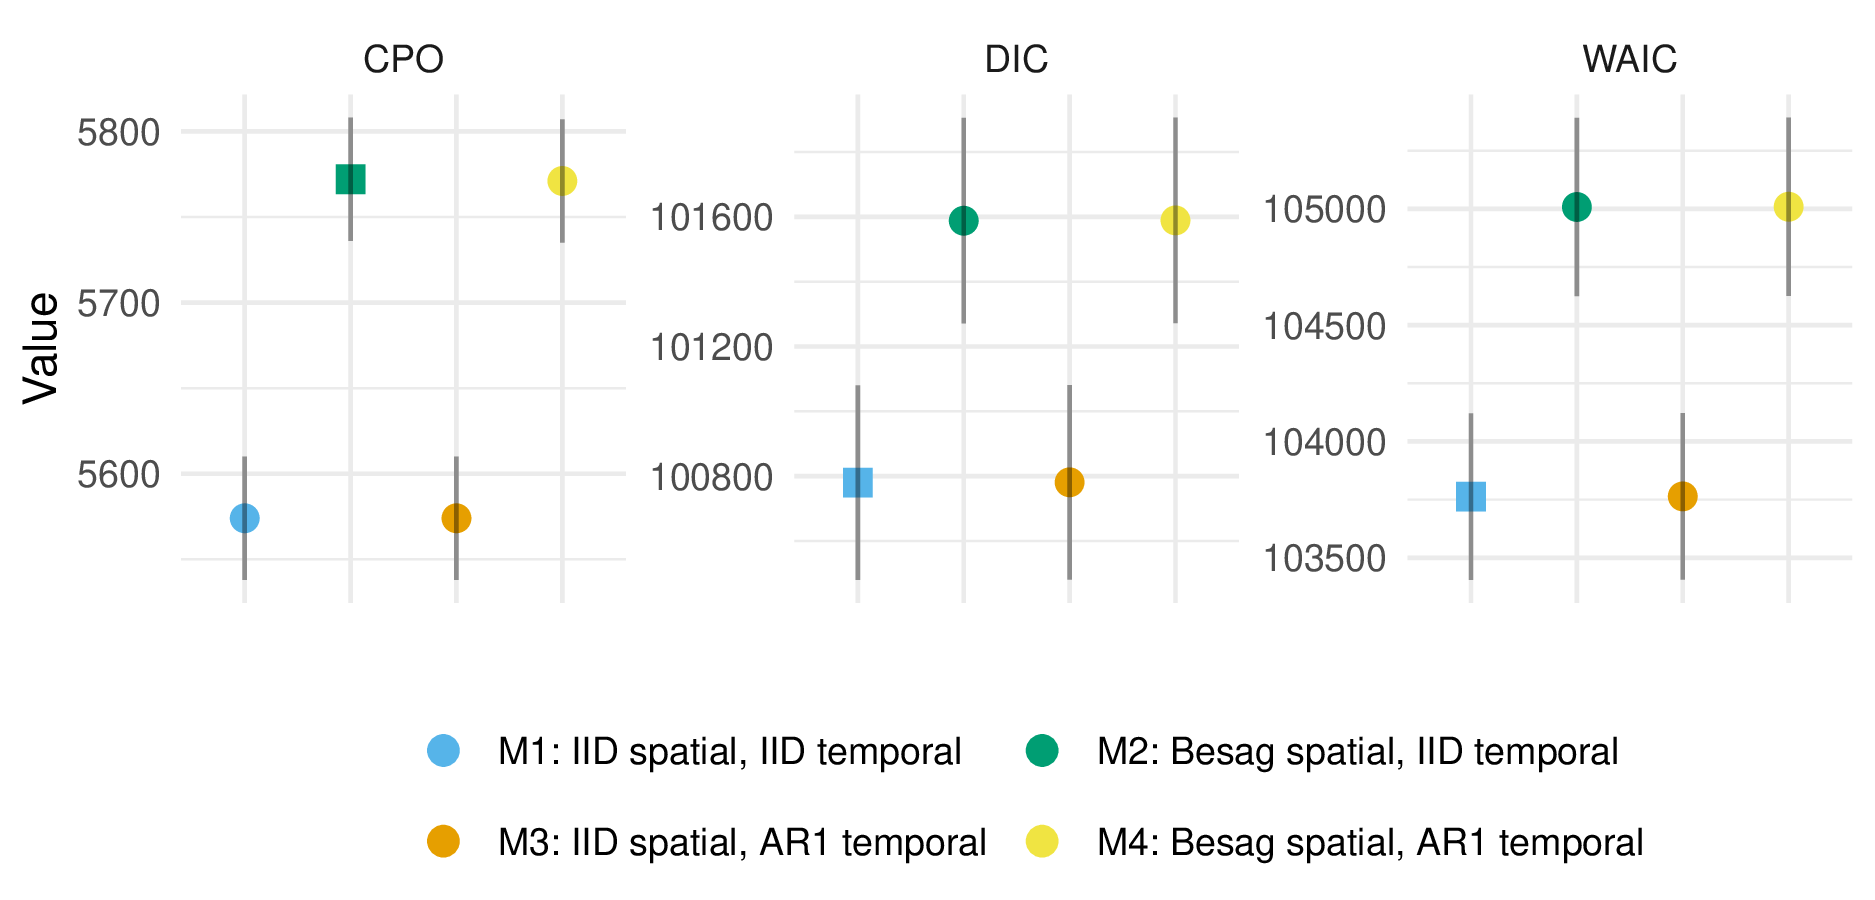 For the multinomial logistic regression model, under the conditional predictive ordinate (CPO) criterion, including Besag spatial random effects rather than IID spatial random effects improved model performance. On the other hand, under the deviance information criterion (DIC) and widely applicable information criterion (WAIC), where smaller values are preferred, the opposite was true. Though IID temporal random effects are preferred by all criteria, AR1 temporal random effects performed very similarly, likely as there is a limited amount of temporal variation in the data to describe.